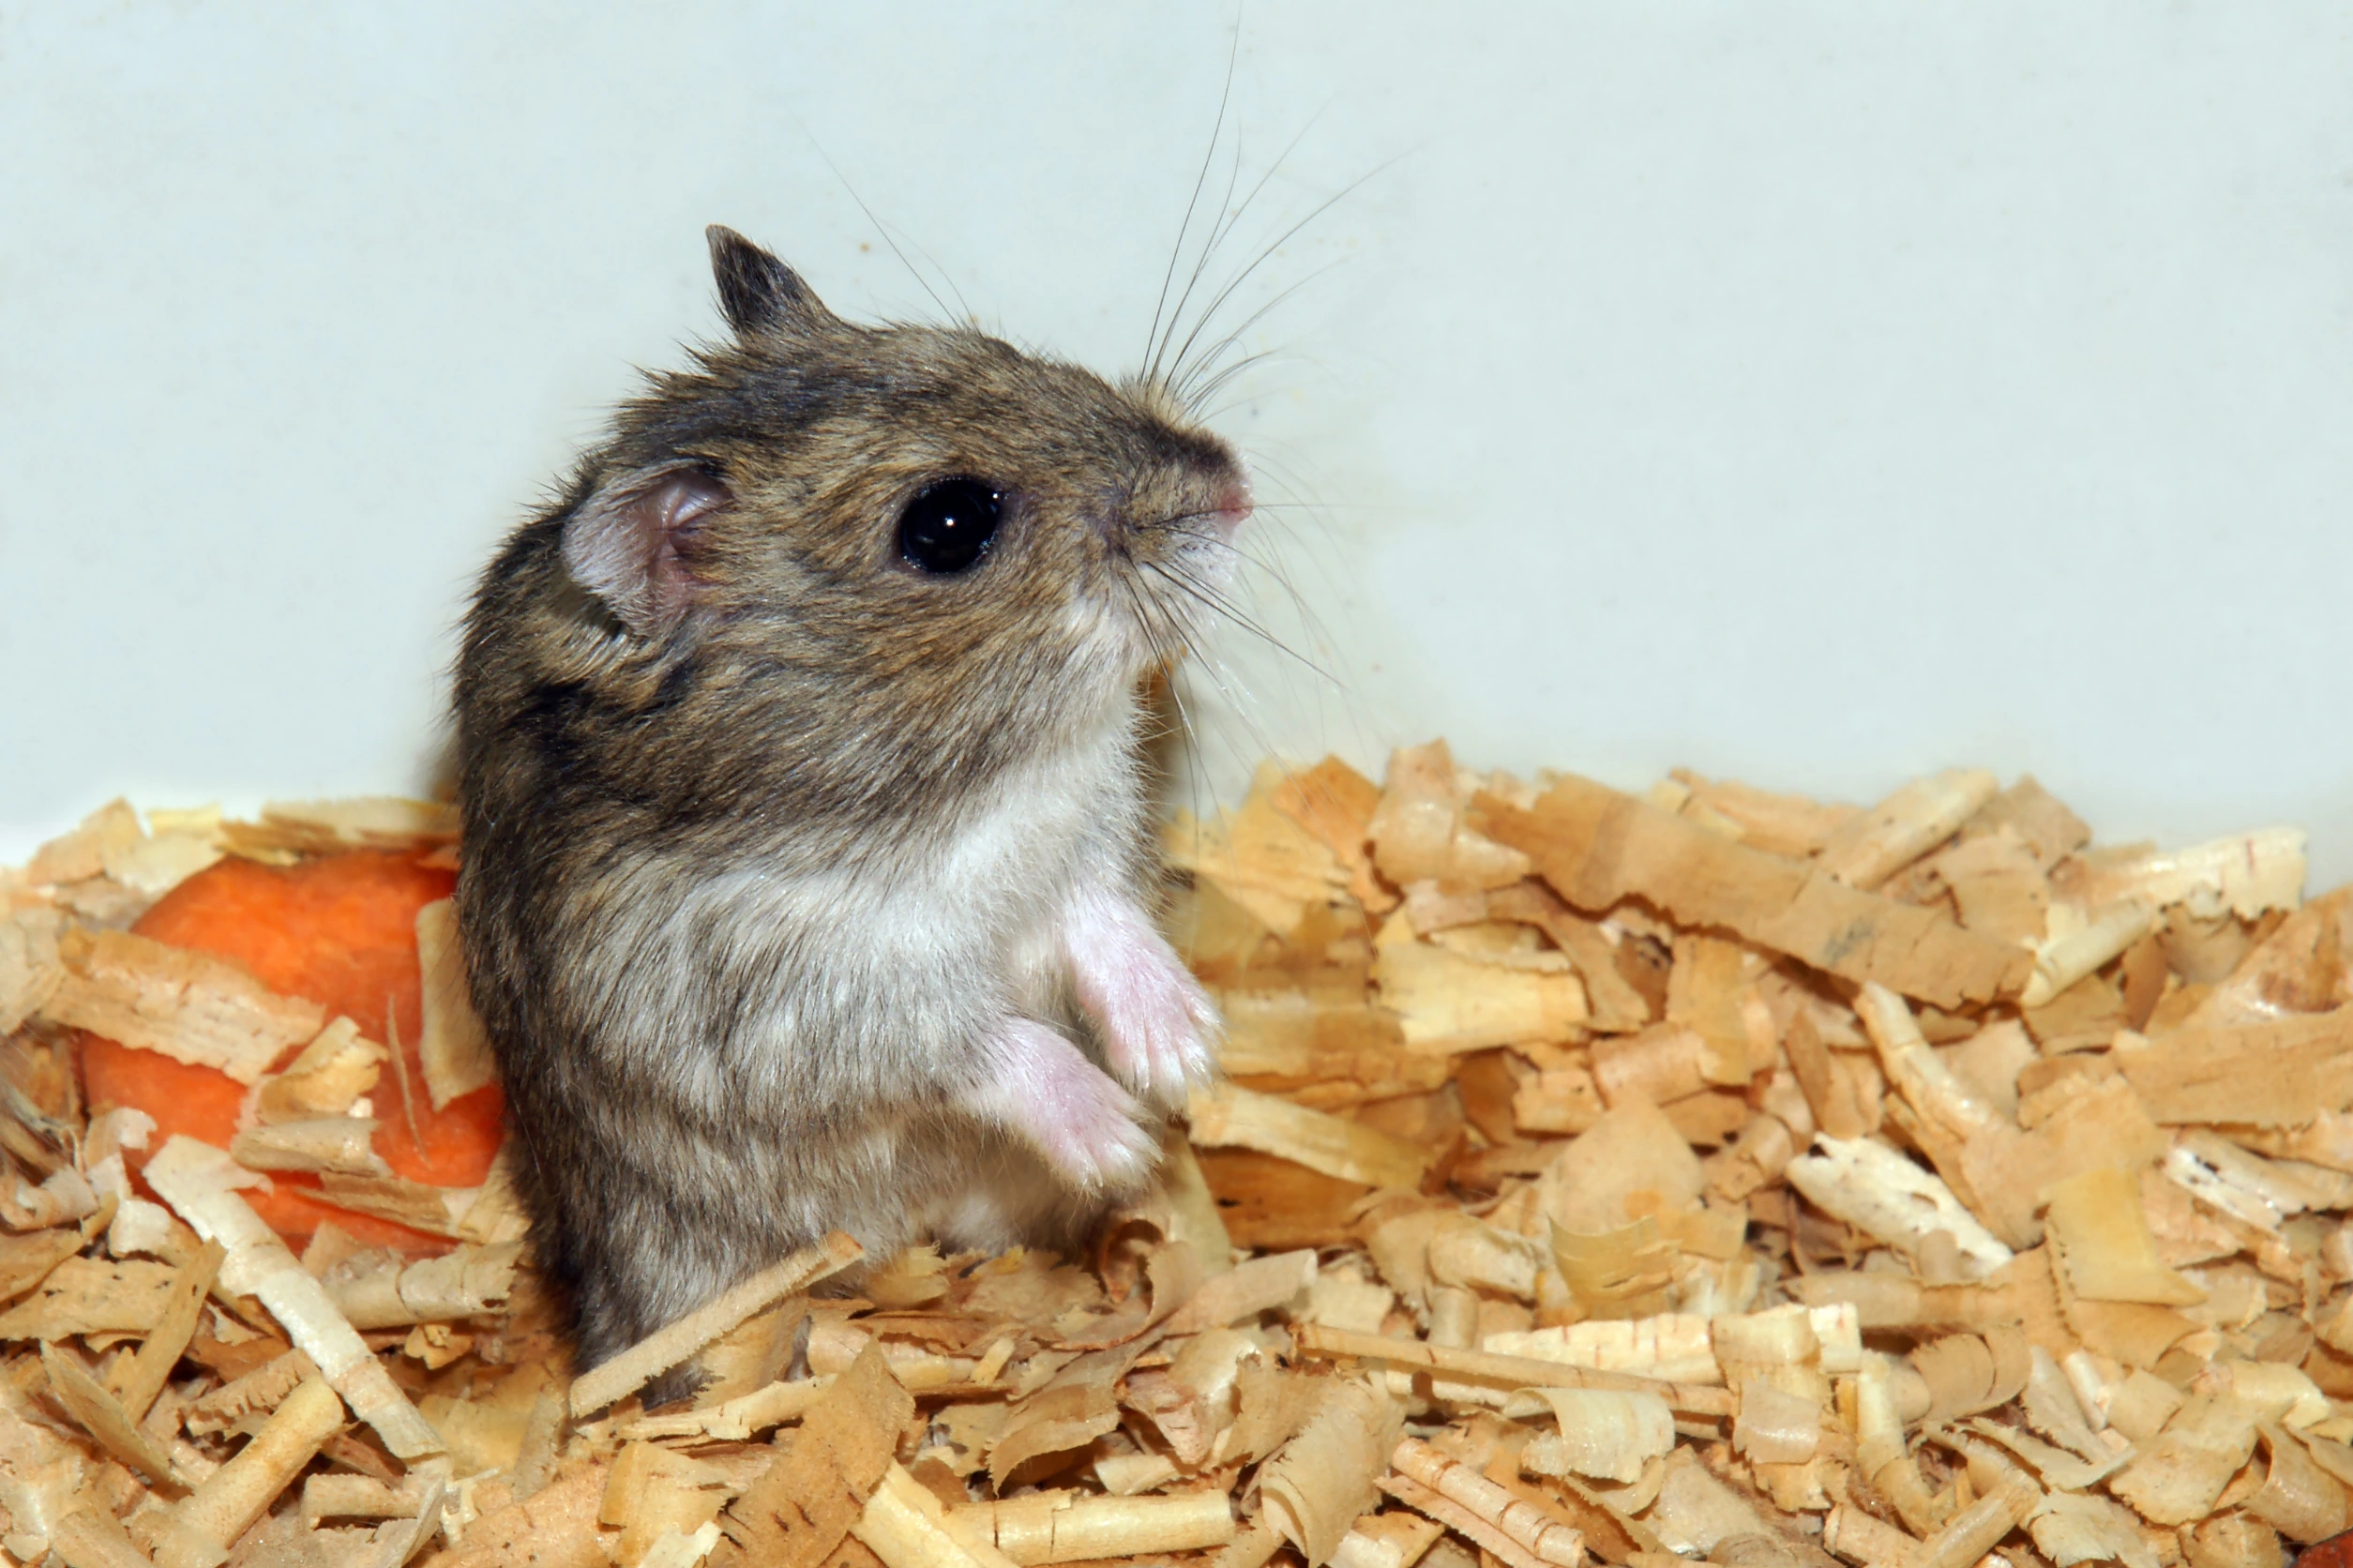 <p>These small rodents are ideal for people living in tiny houses or apartments. They are housed in cages that can fit in small spaces and are relatively low maintenance. Watching them play and scurry around can be delightful, and their nocturnal nature makes them active during evenings, aligning well with most people’s home schedules.</p>